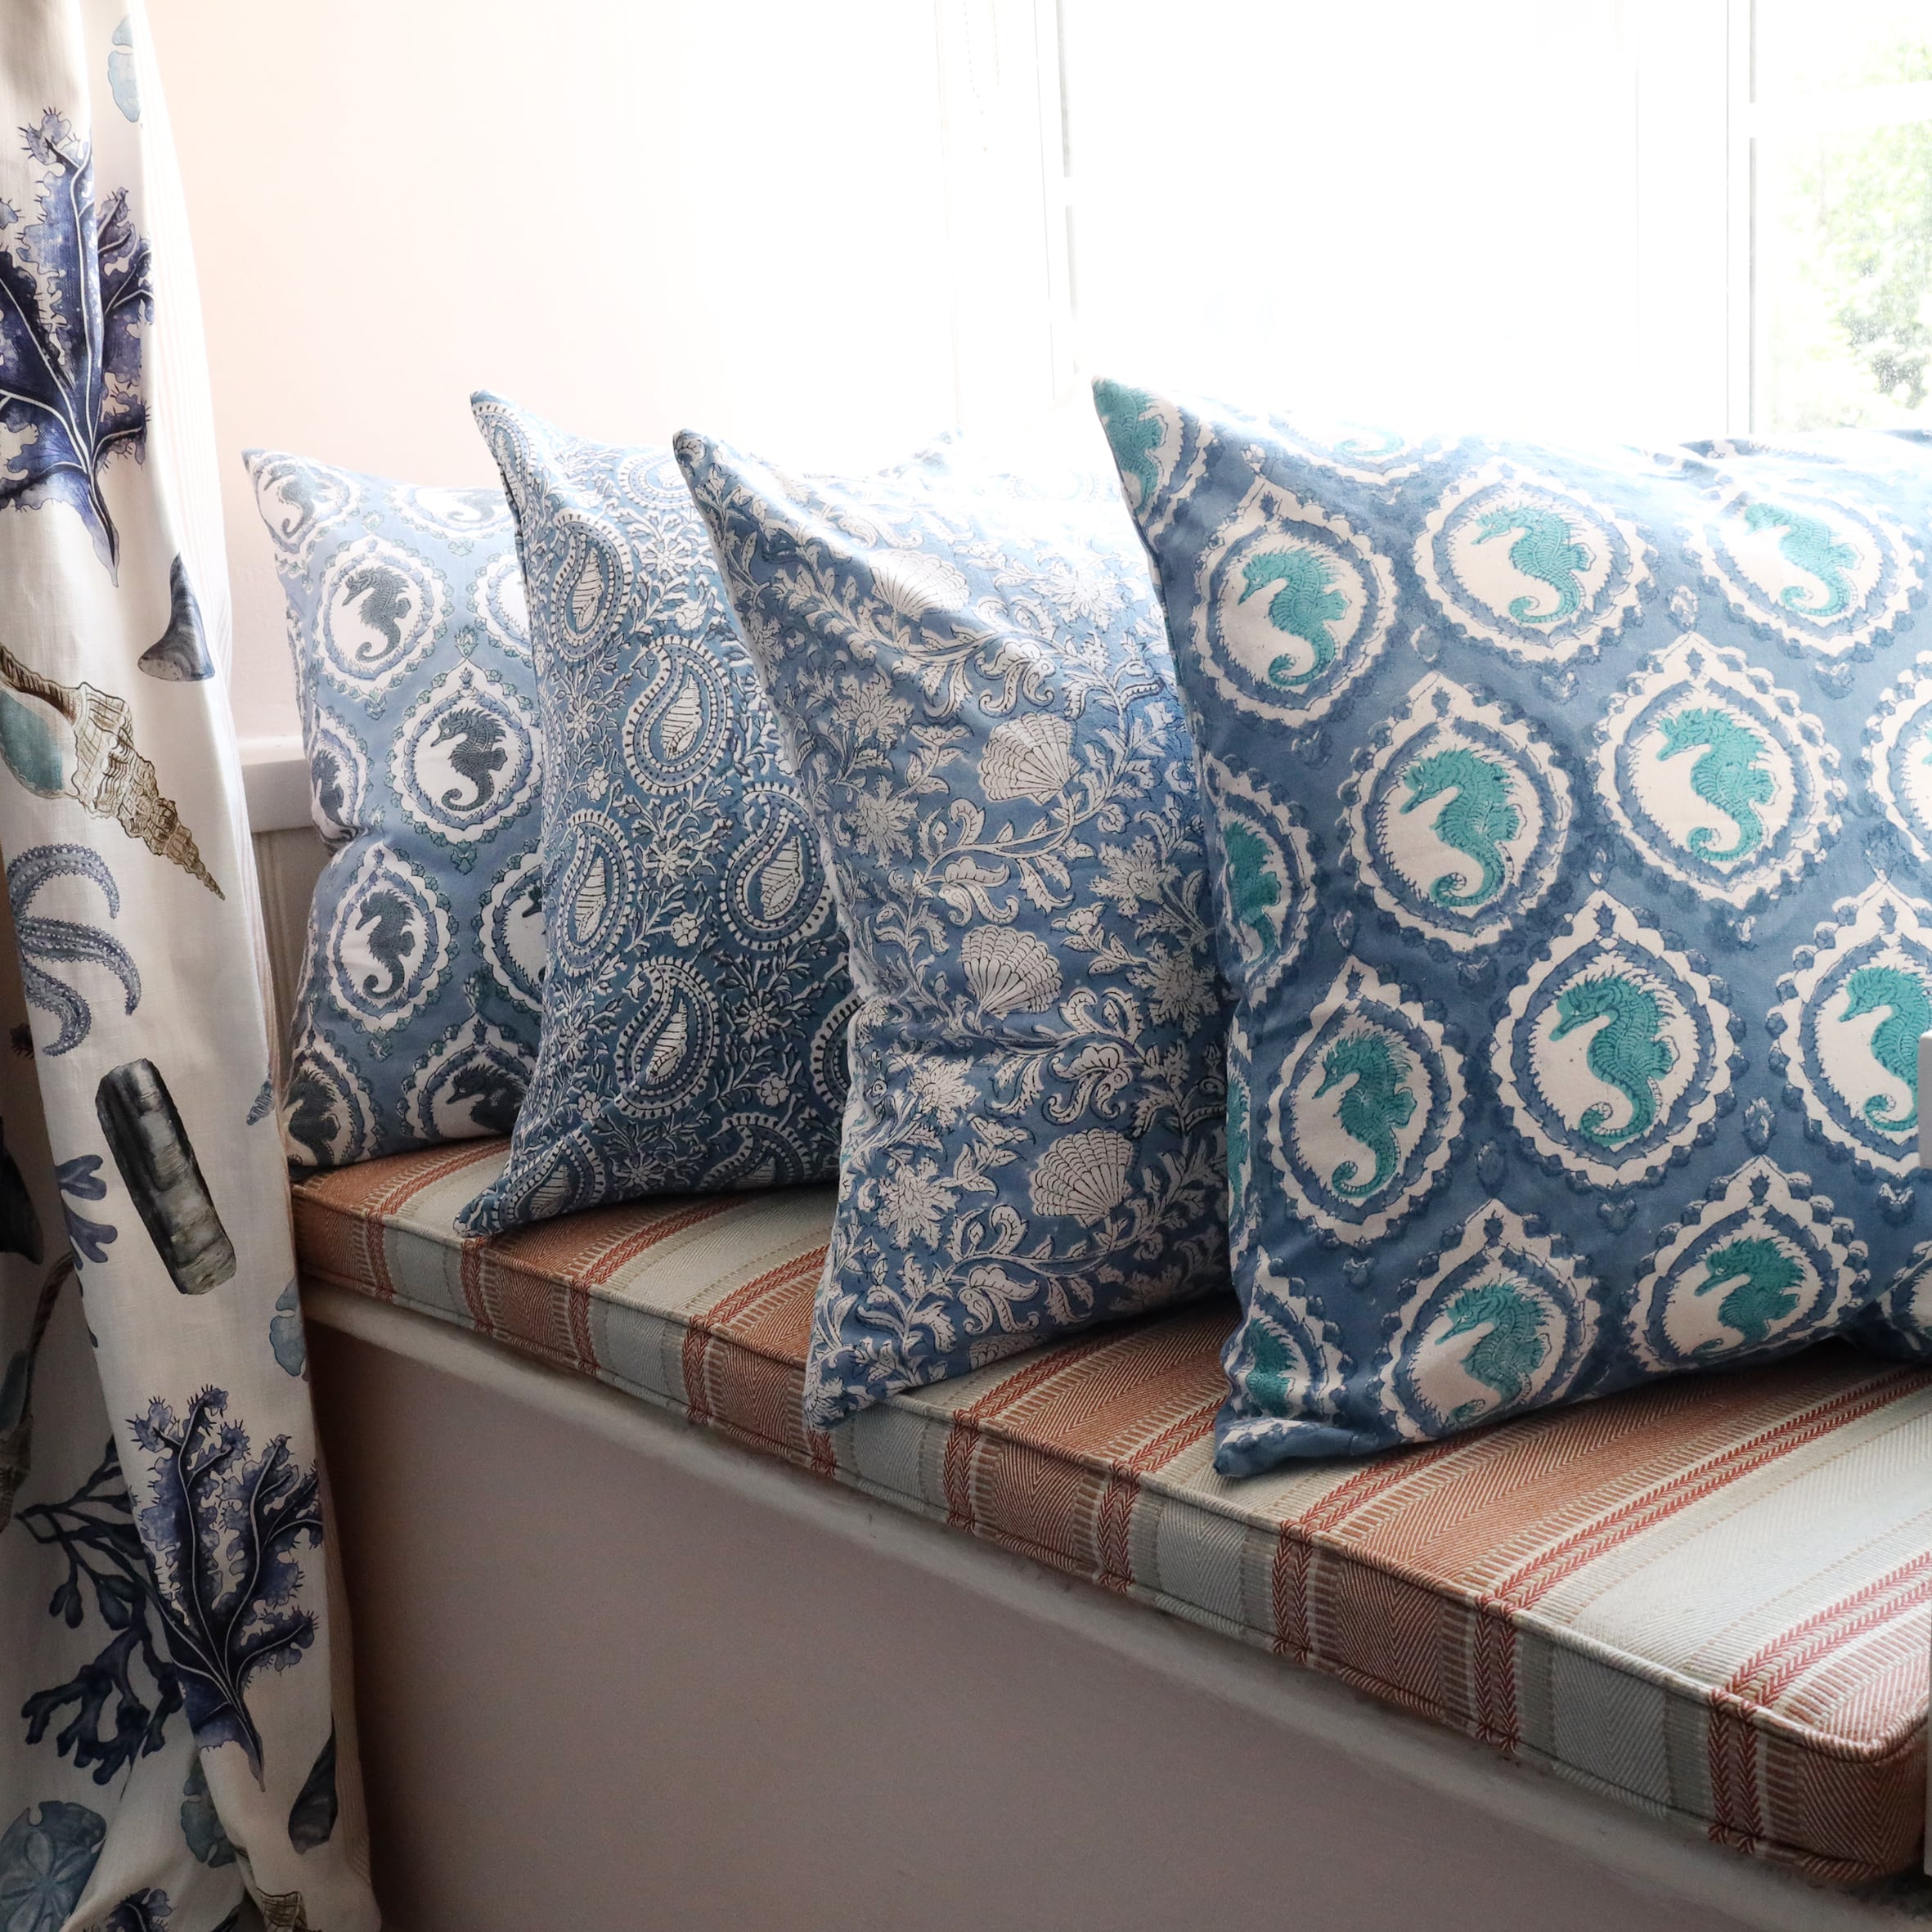 Ocean Blue Seahorse Cameo cushion which is Hand block printed fabric on a window seat.Also on the seat are other Hand block printed cushions,you can see the Rockpool Curtains to the side.